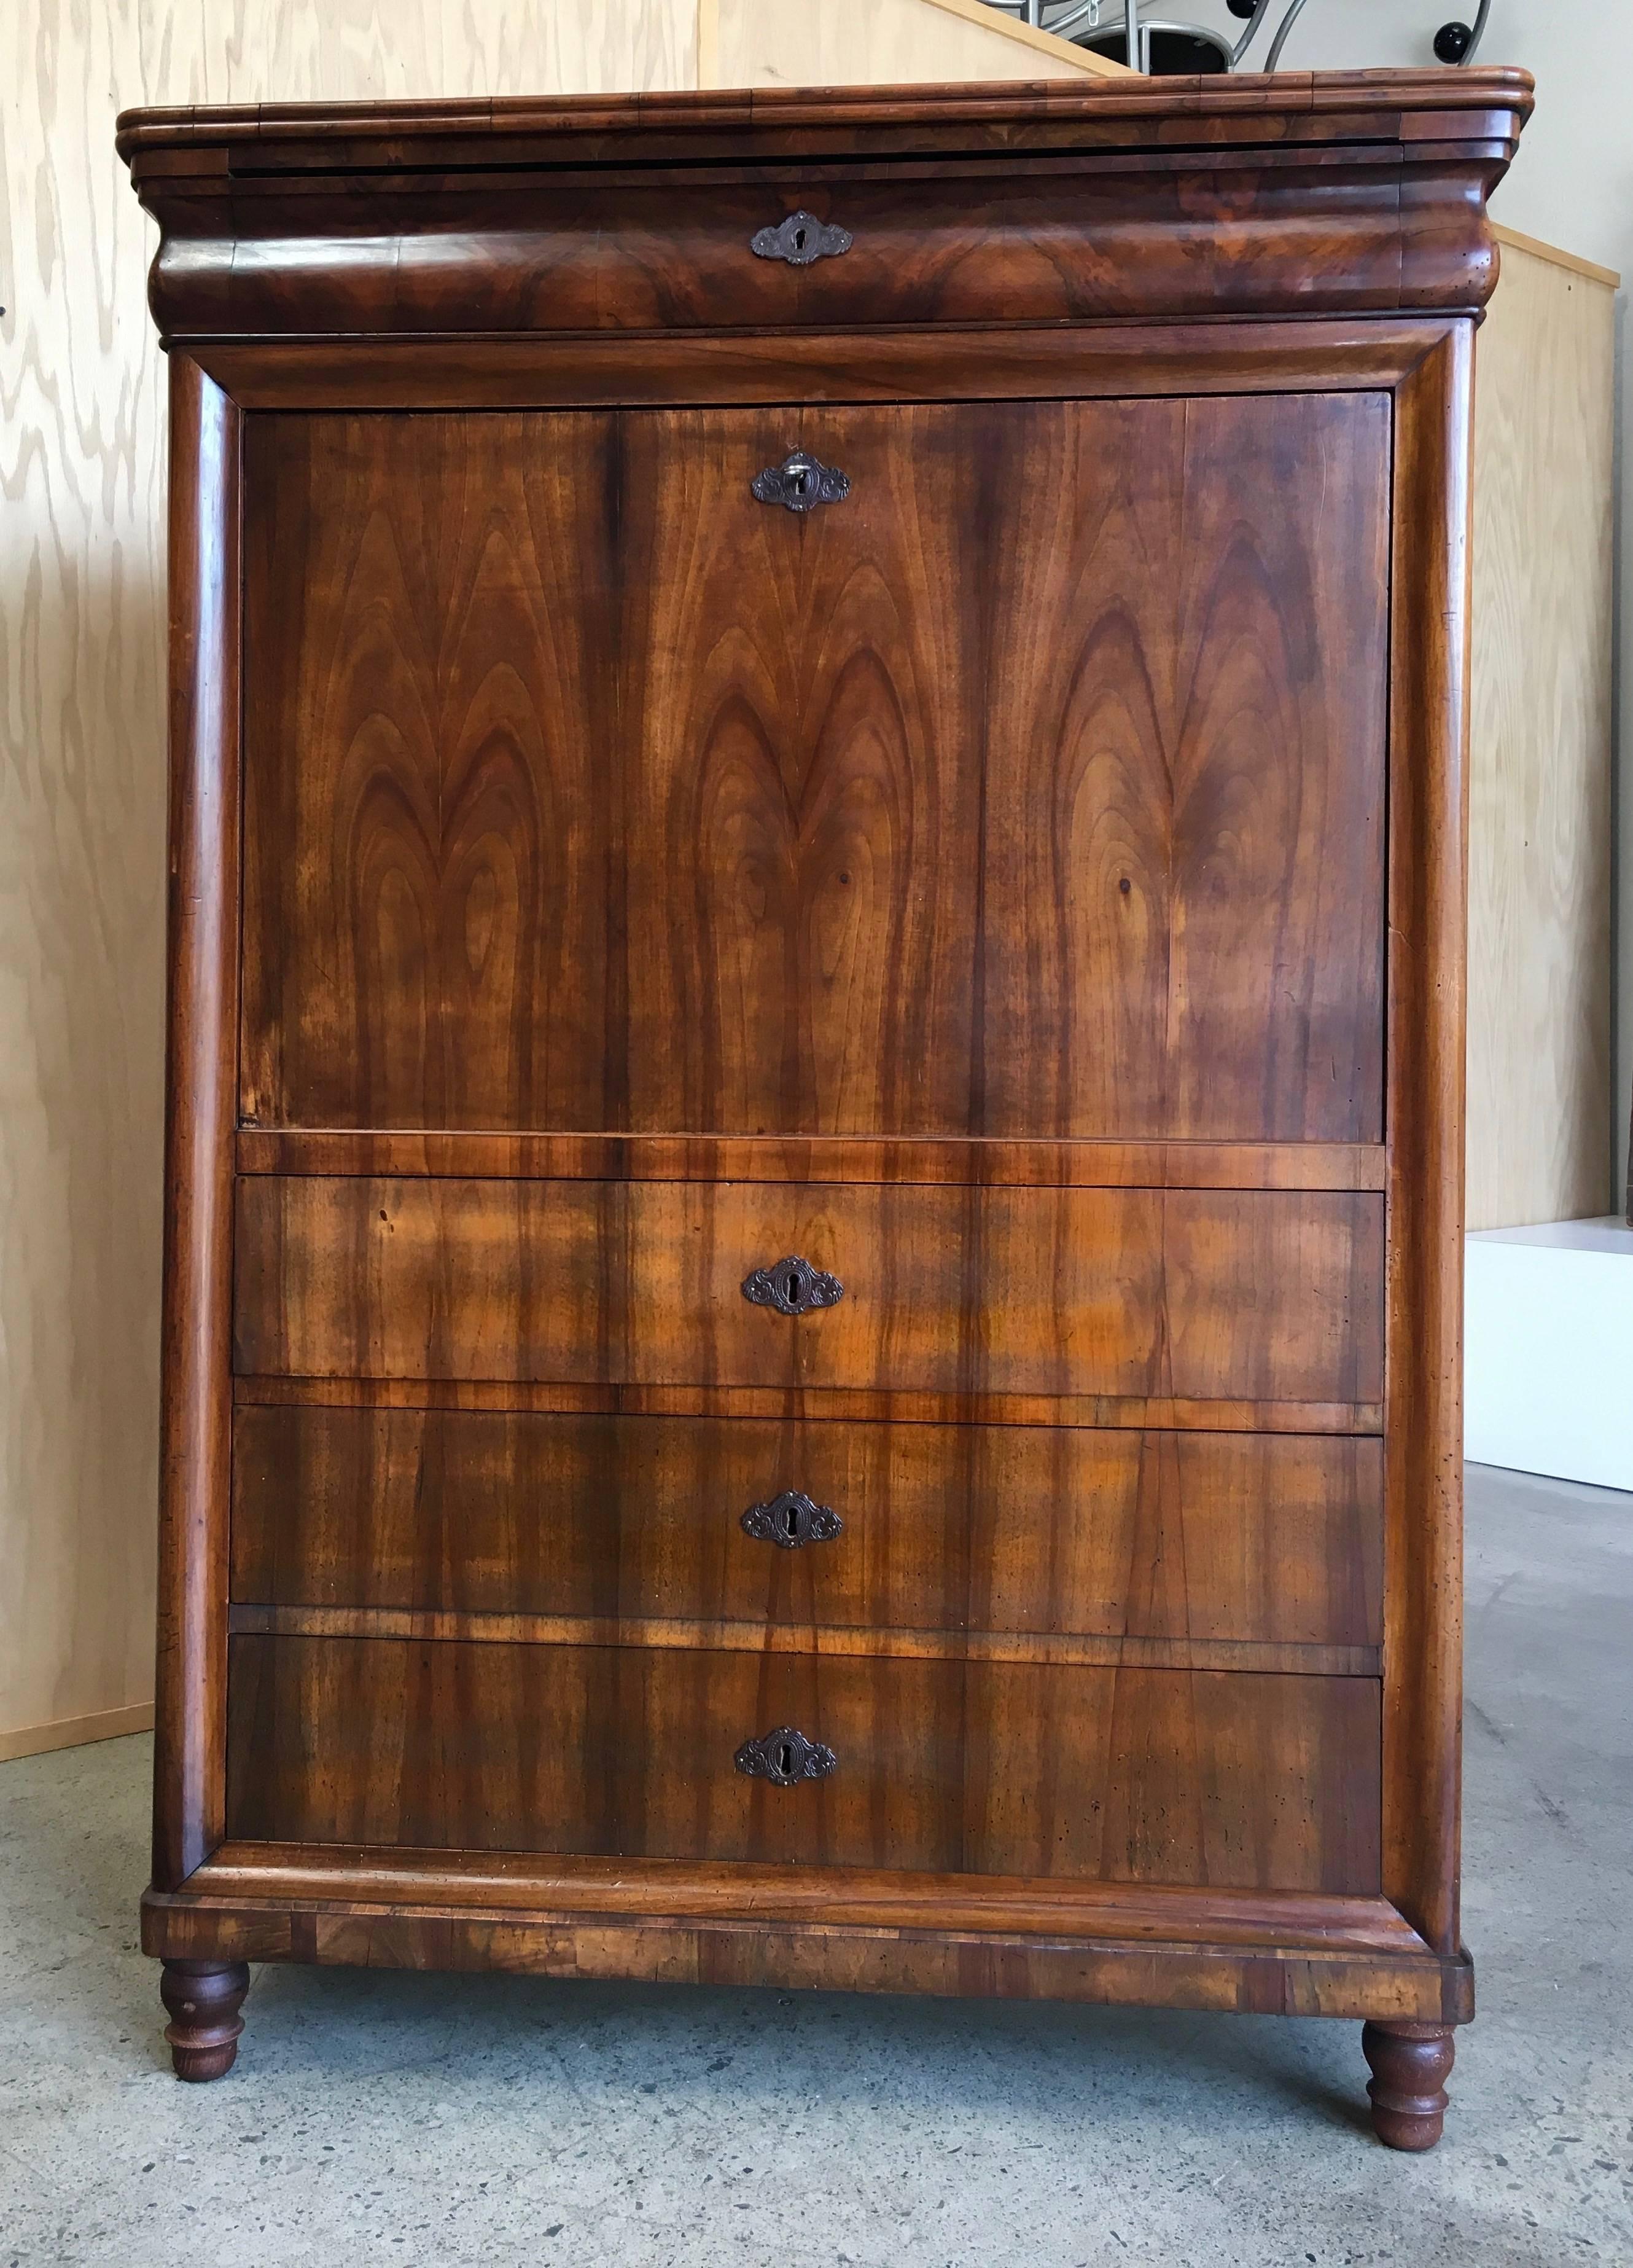 19th century Biedermeier fall front secretary/chest with secret drawer and figured fruitwood front.